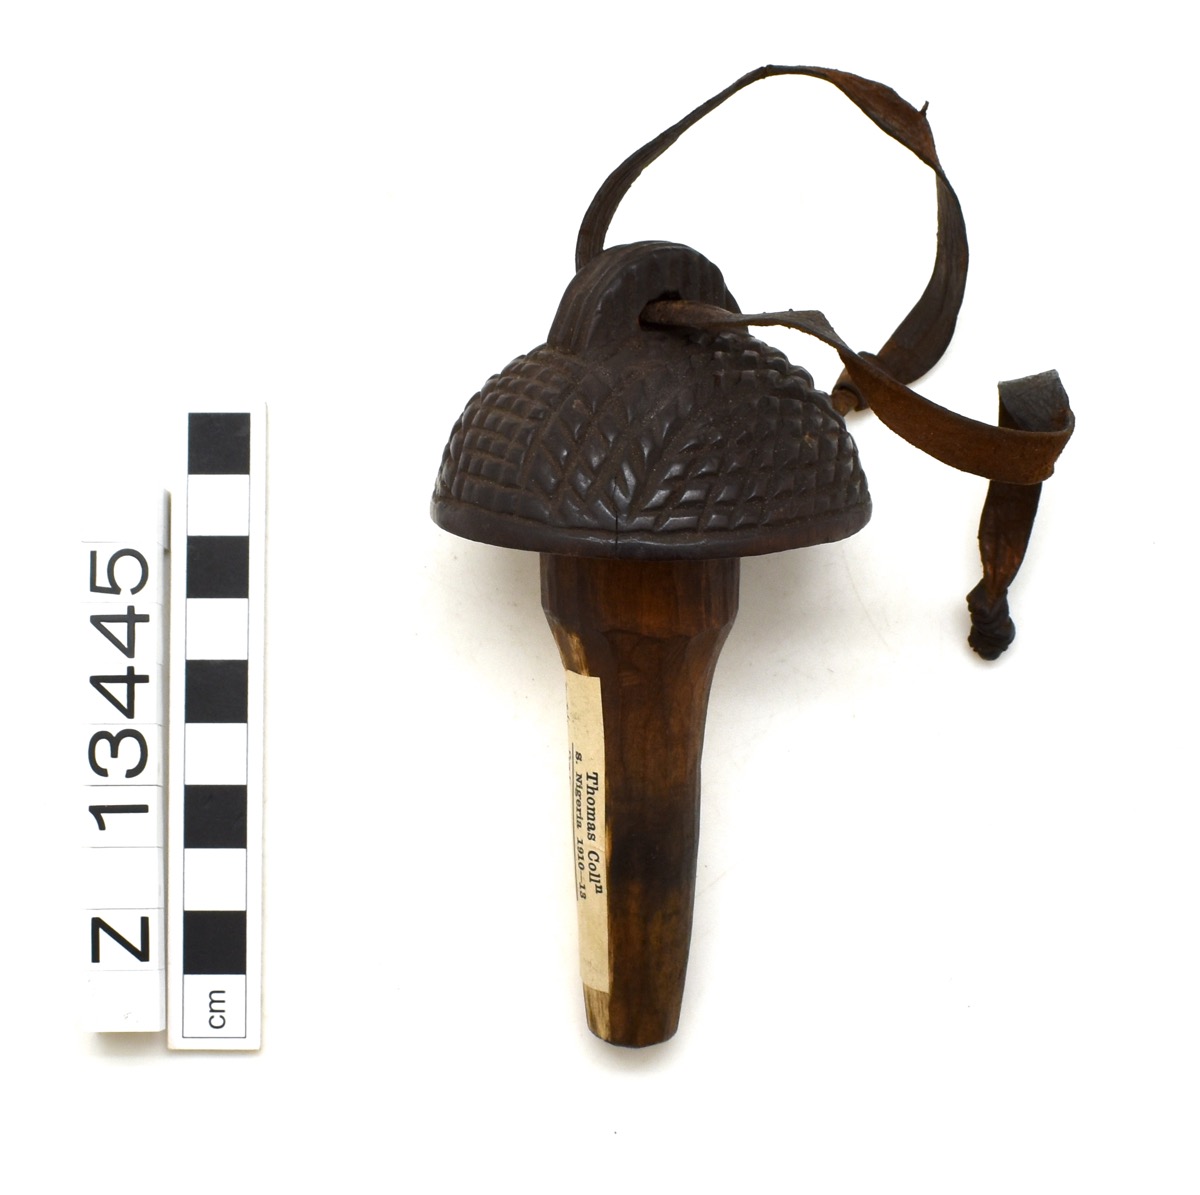 Bottle stopper with a rounded top and curved handle. Rippled designs on the top, which is cone-like in shape. A leather handle with open ends is looped through the handle.